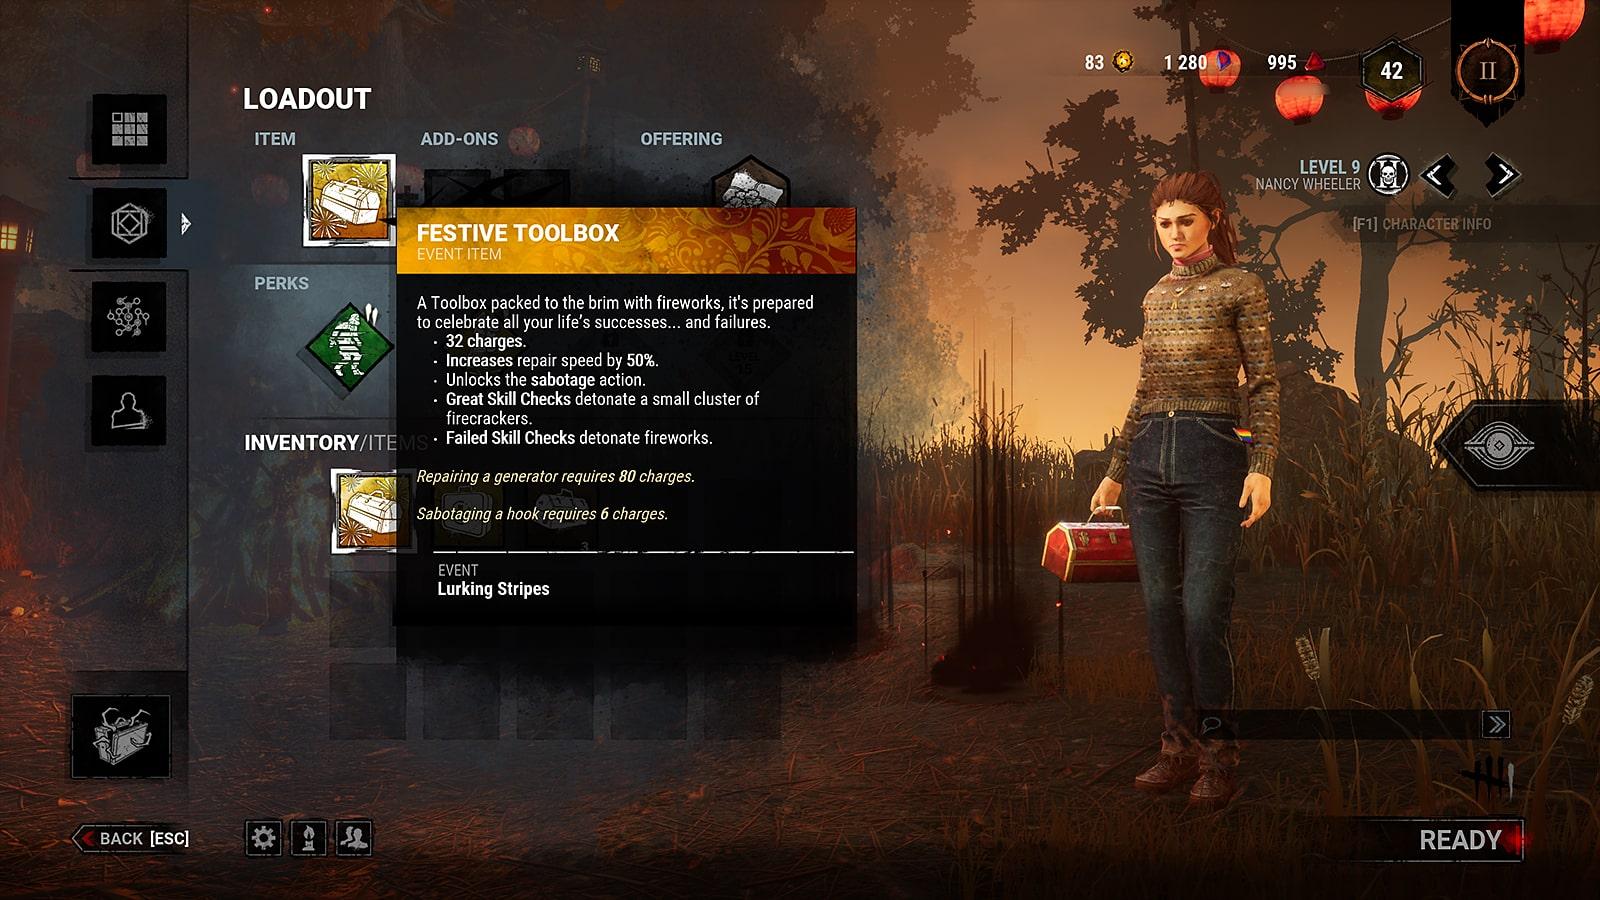 An image of the Festive Toolbox item in DBD